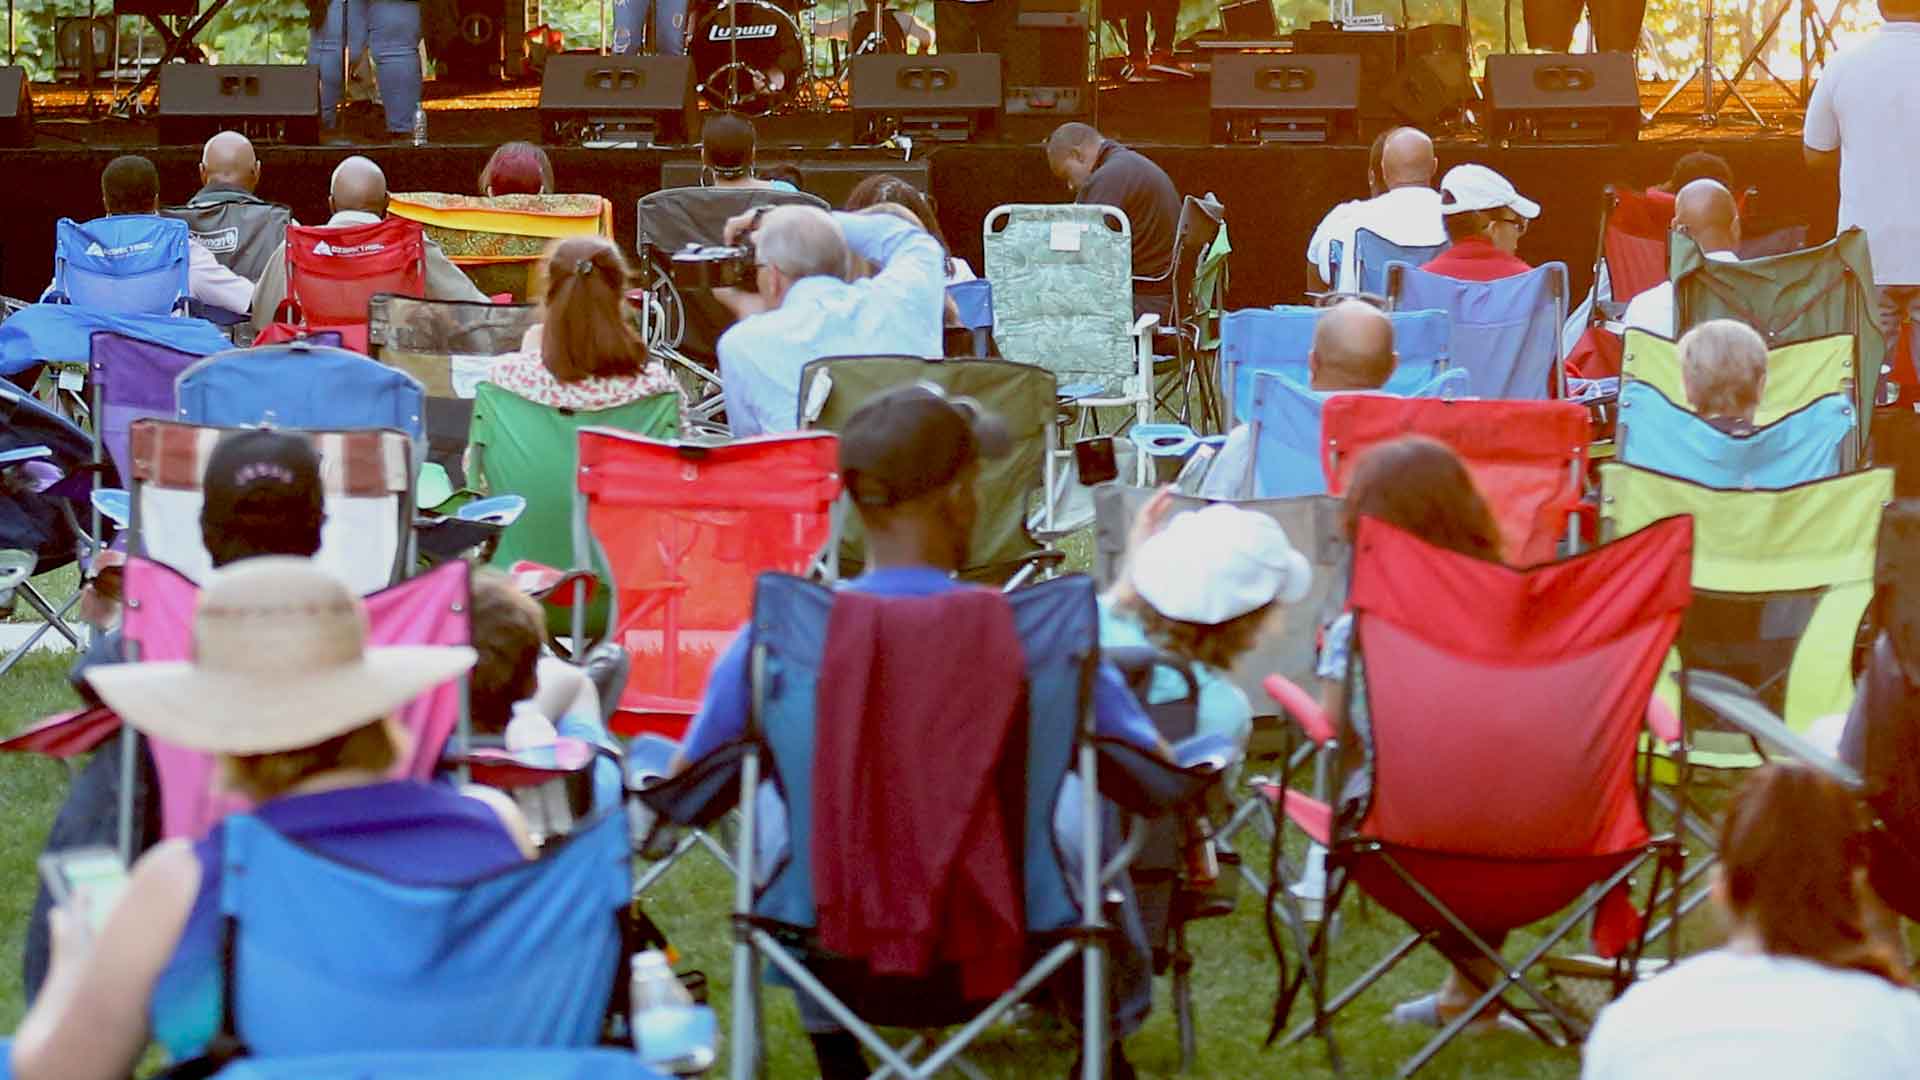 What to bring to an outdoor concert